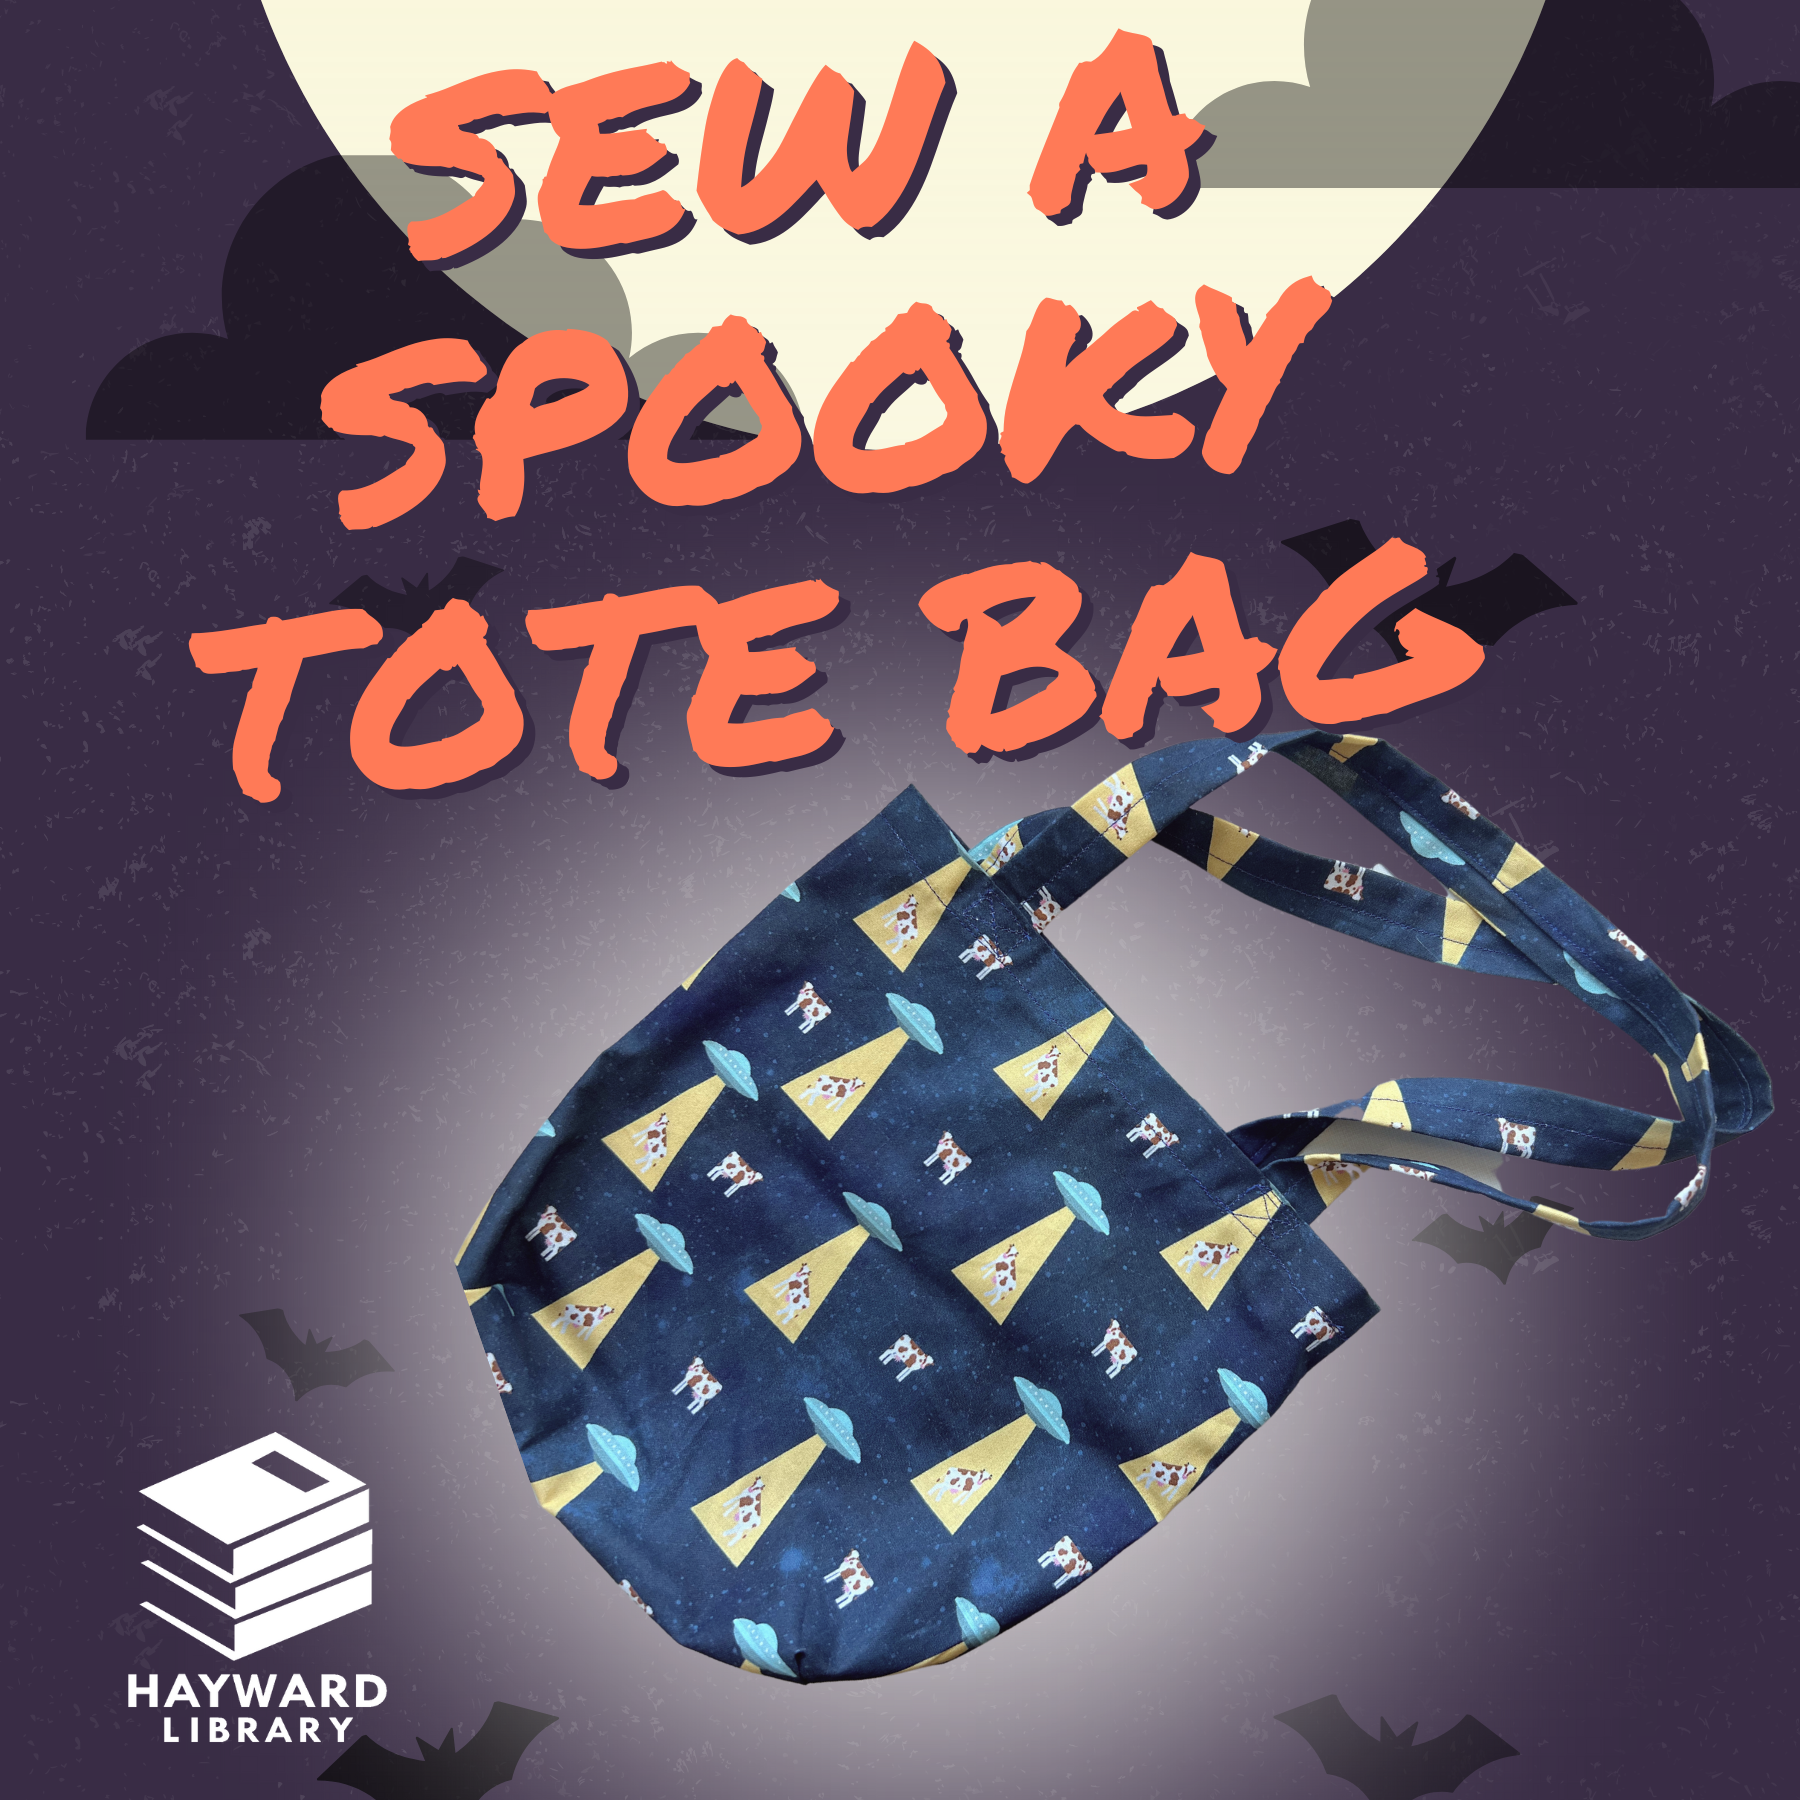 Image depicts a tote bag over a night sky with bats, reads "Sew a Spooky Tote Bag" with Hayward Public Library logo.